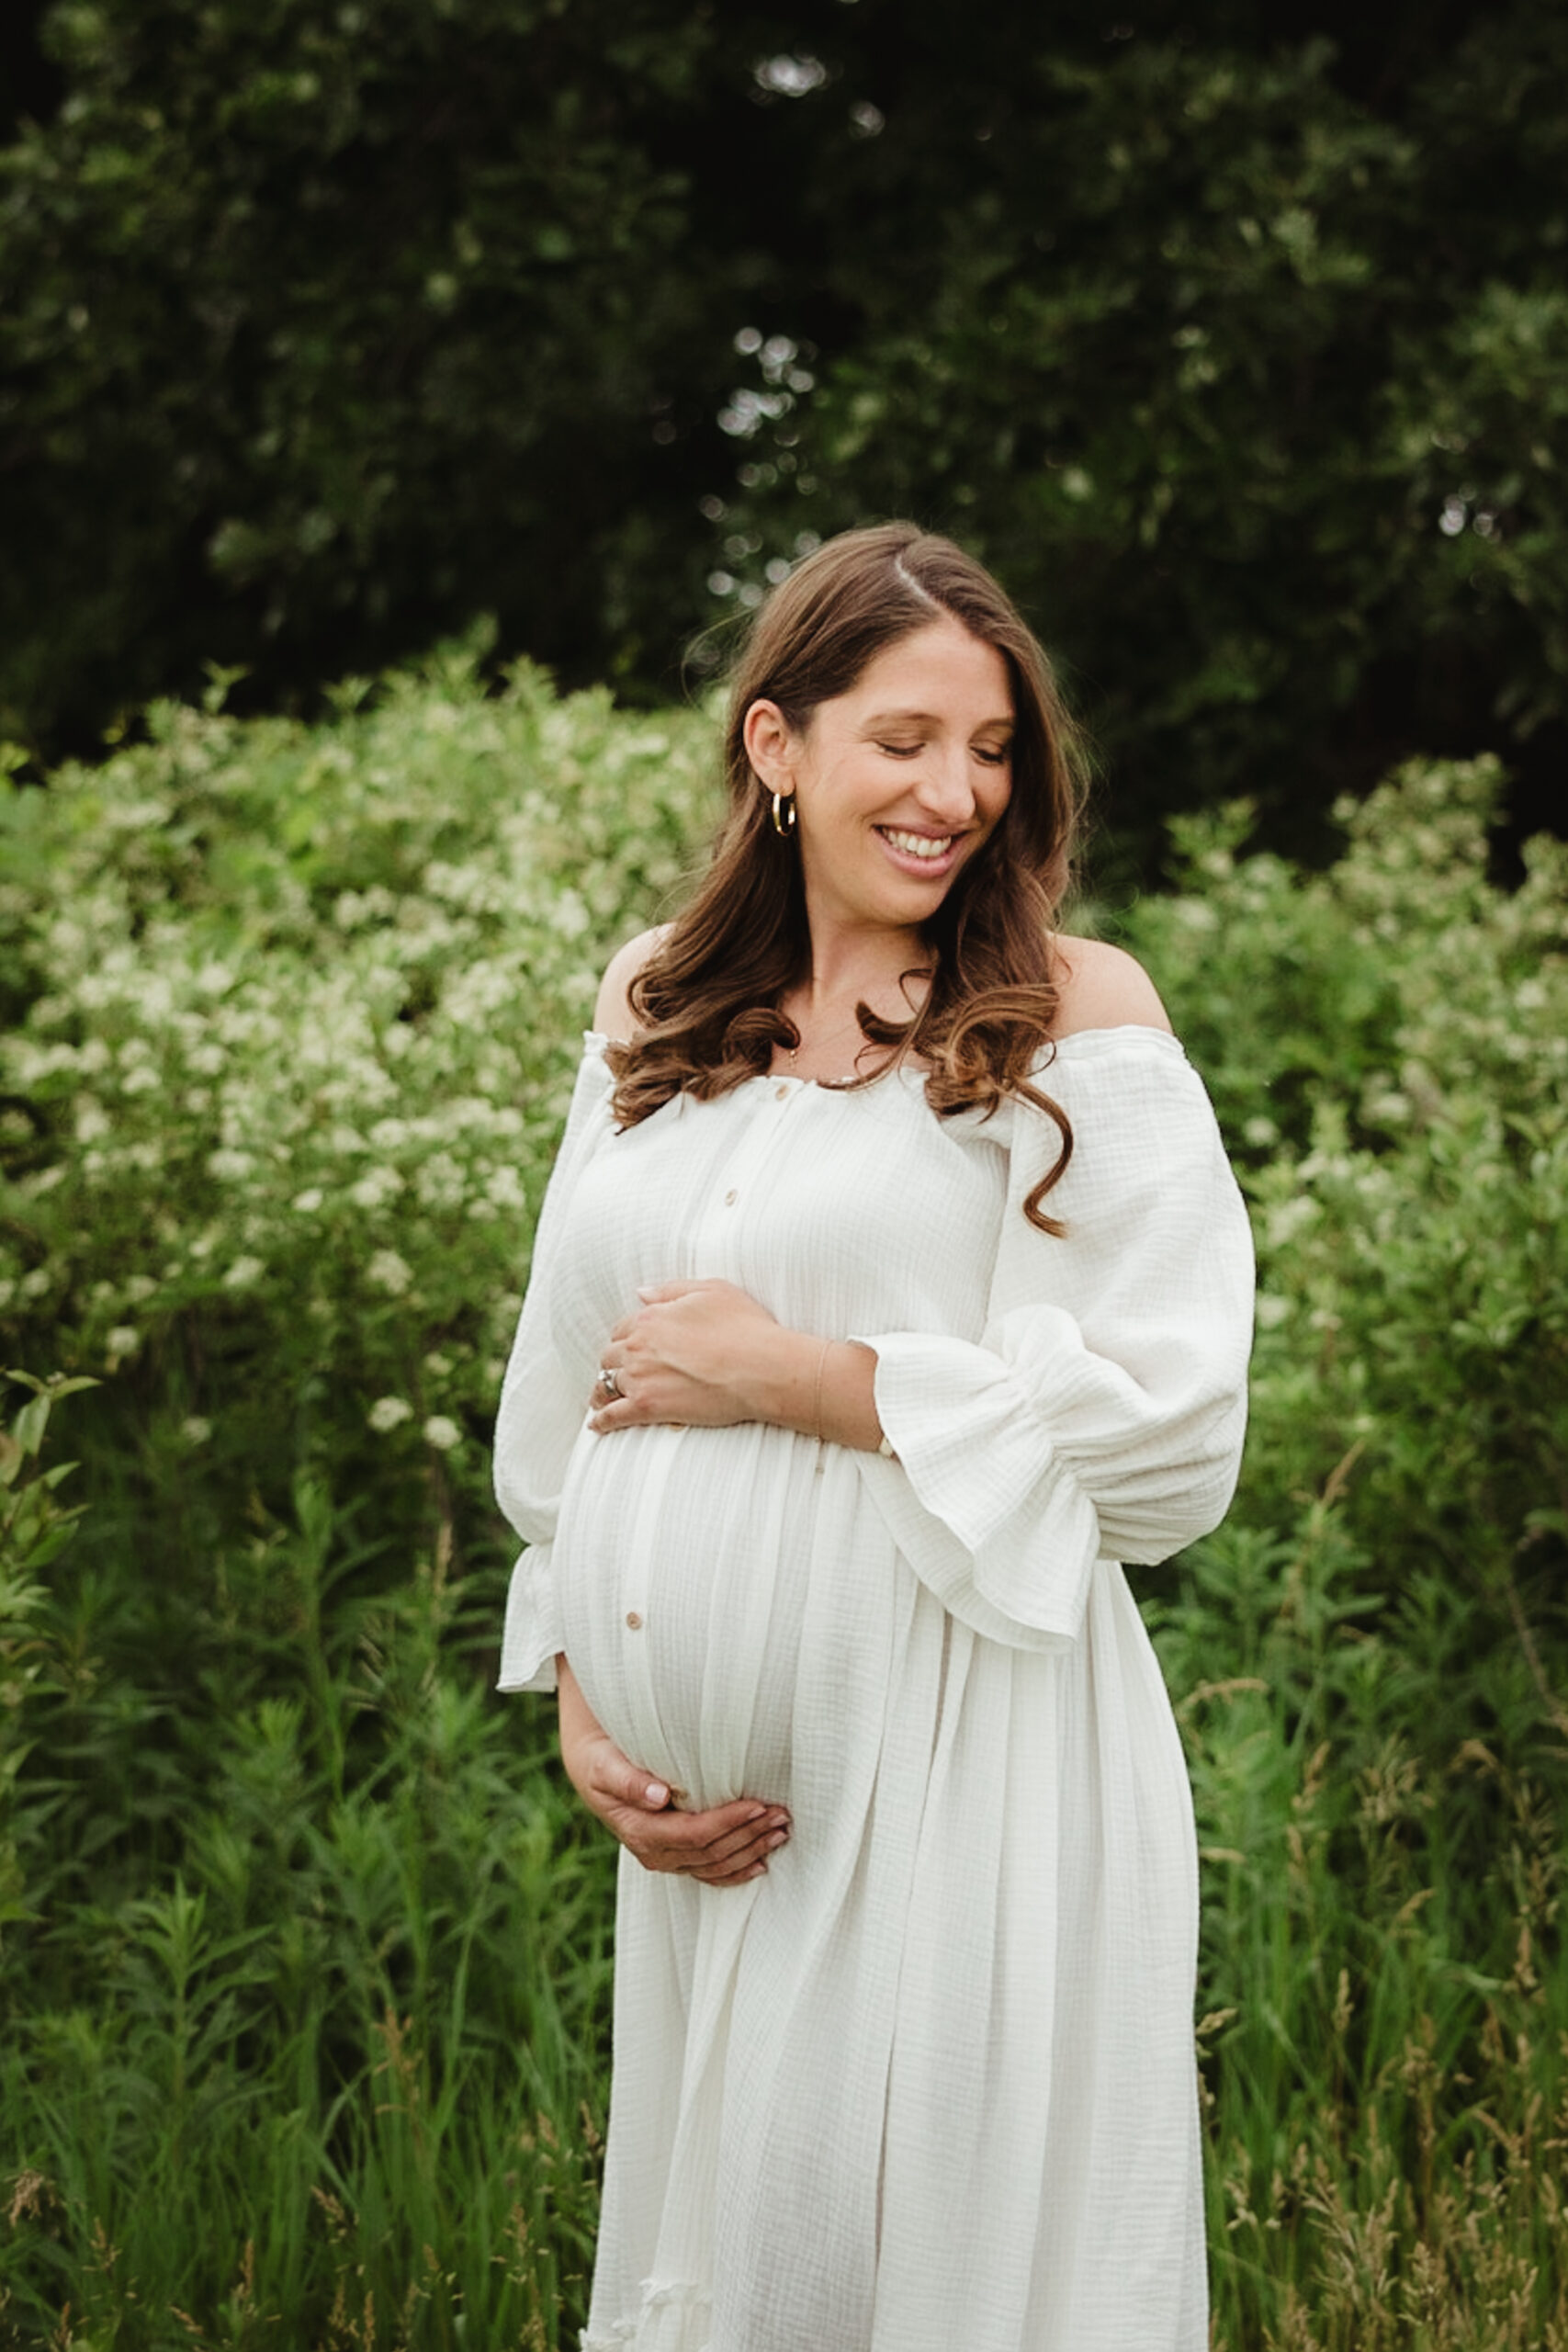 A pregnant mom cradles her growing belly during her maternity photos session.